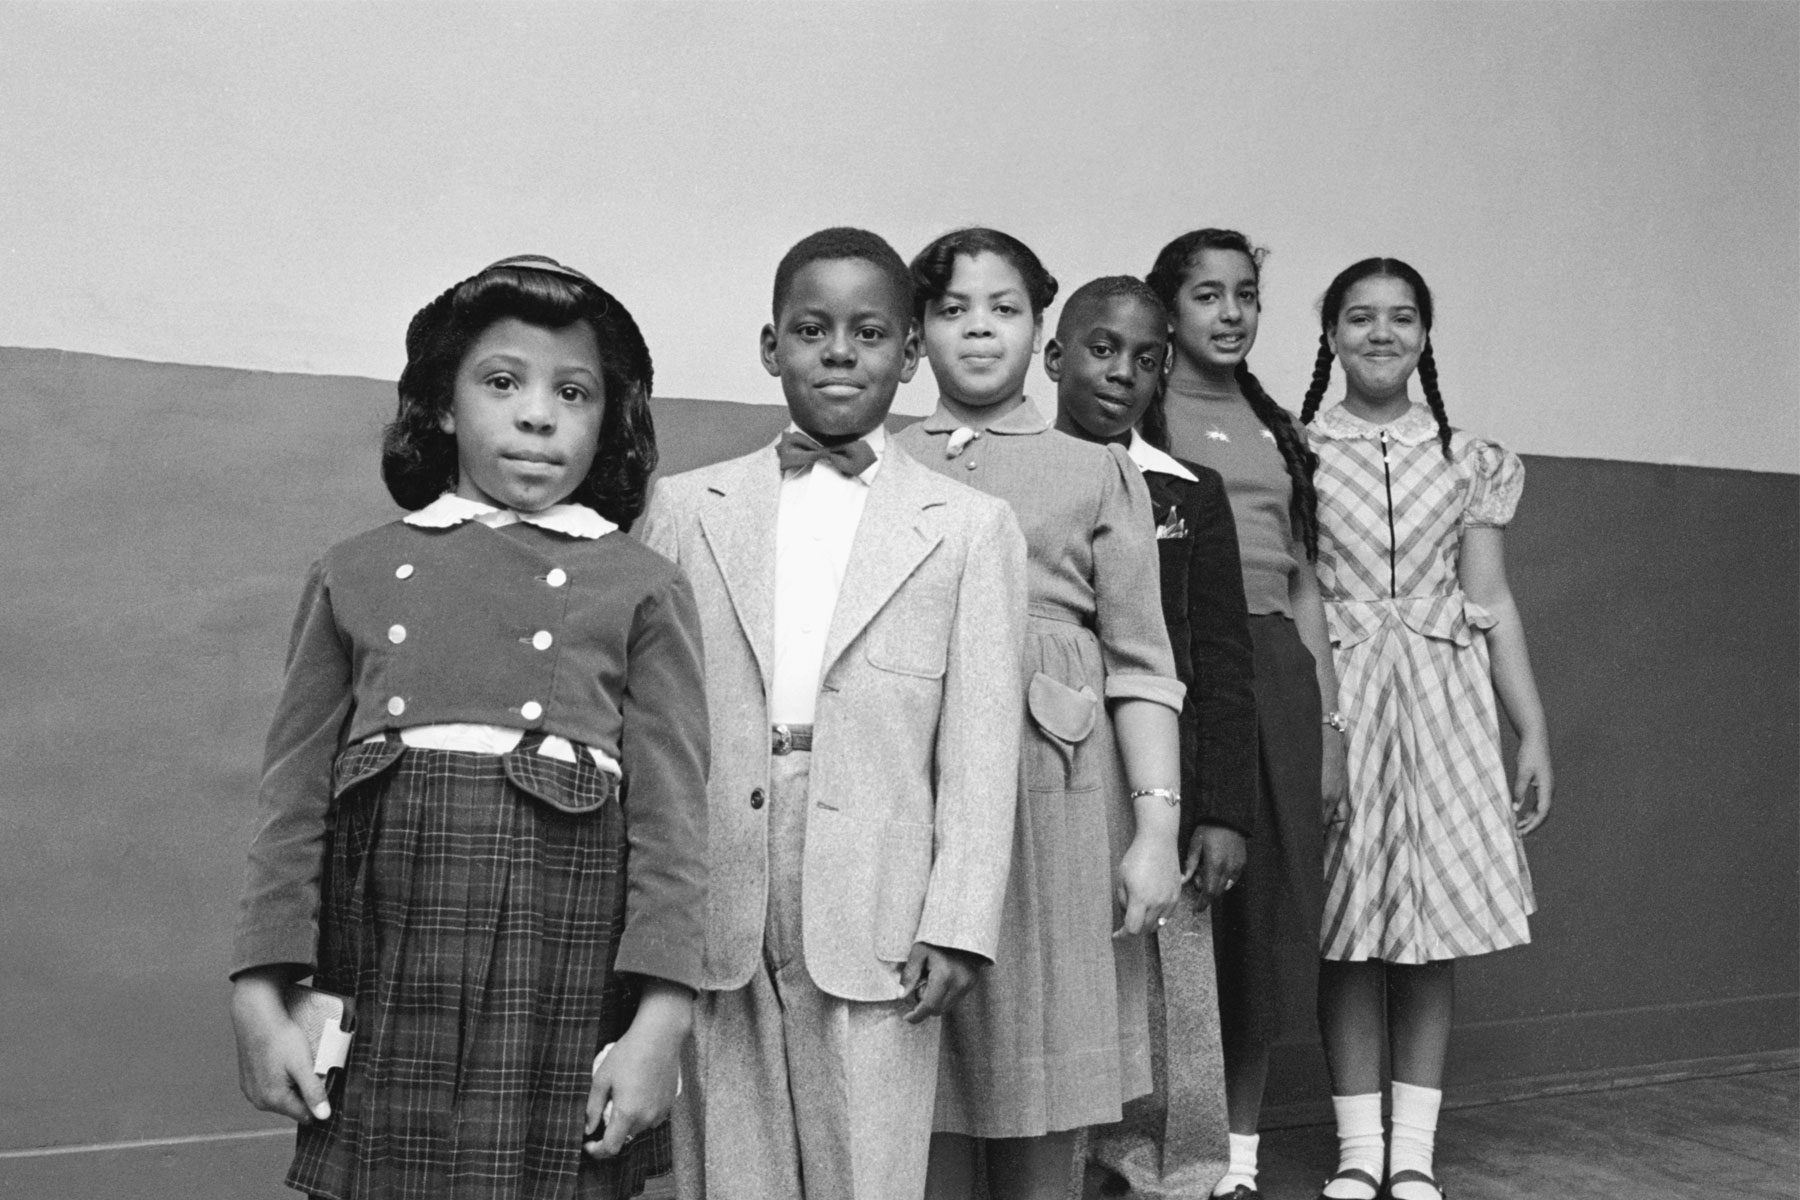 Portrait of the children involved in the landmark Civil Rights lawsuit 'Brown V. Board of Education'.